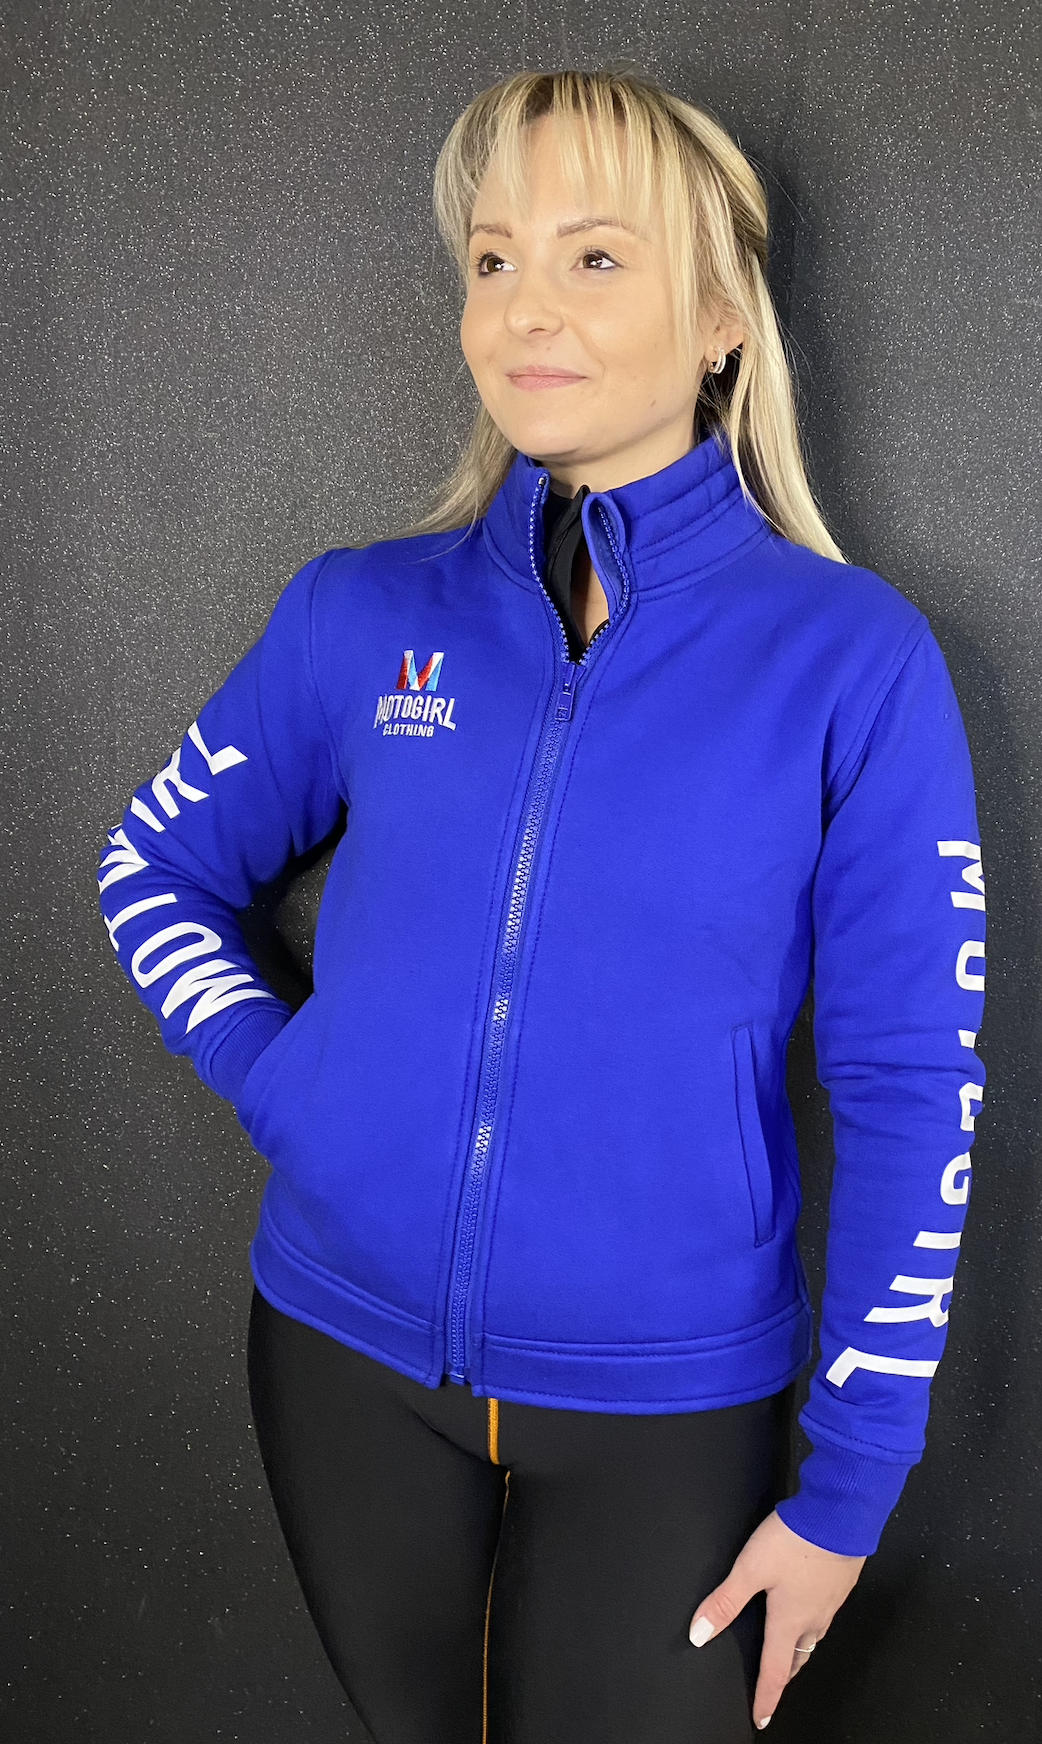 a blond woman wearing Motogirl clothing blue sweatshirt with a front zip